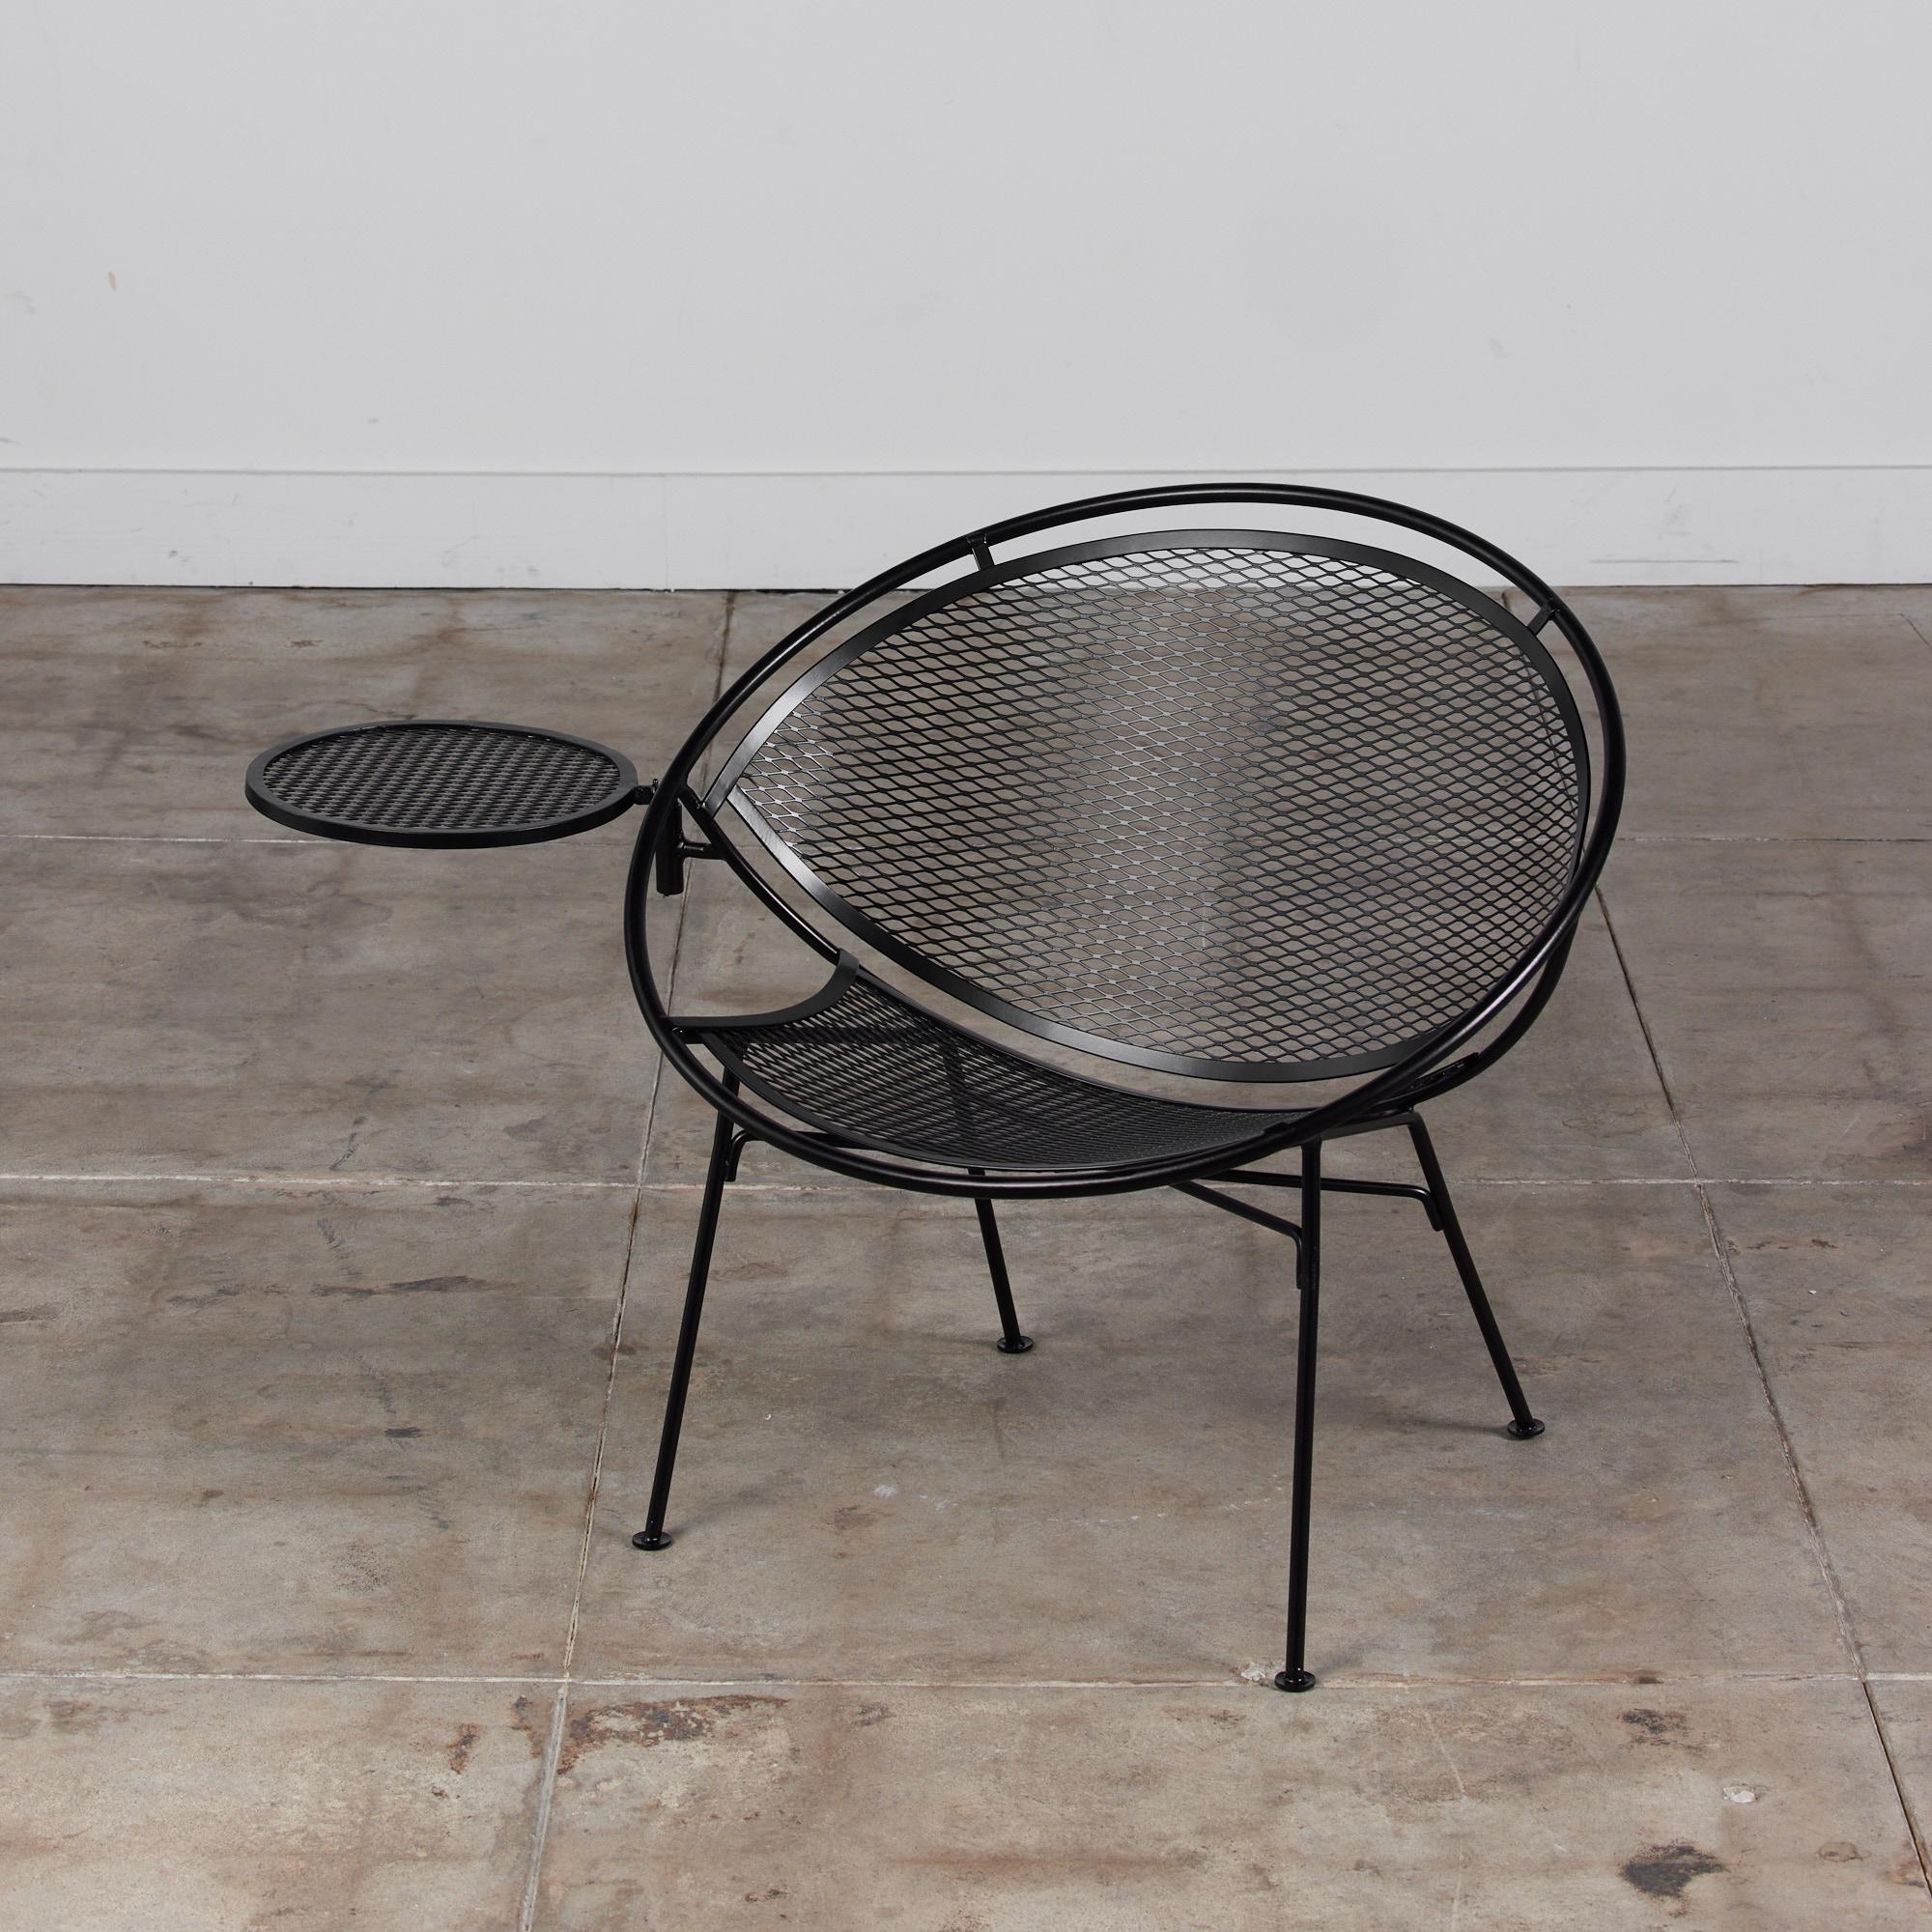 “Radar” wrought iron patio lounge chair designed by Maurizio Tempestini for John Salterini, c.1950s, USA. The chair has a bisected hoop construction with a delicate grid of wrought iron forming the body and a rare detachable drink table. Four angled